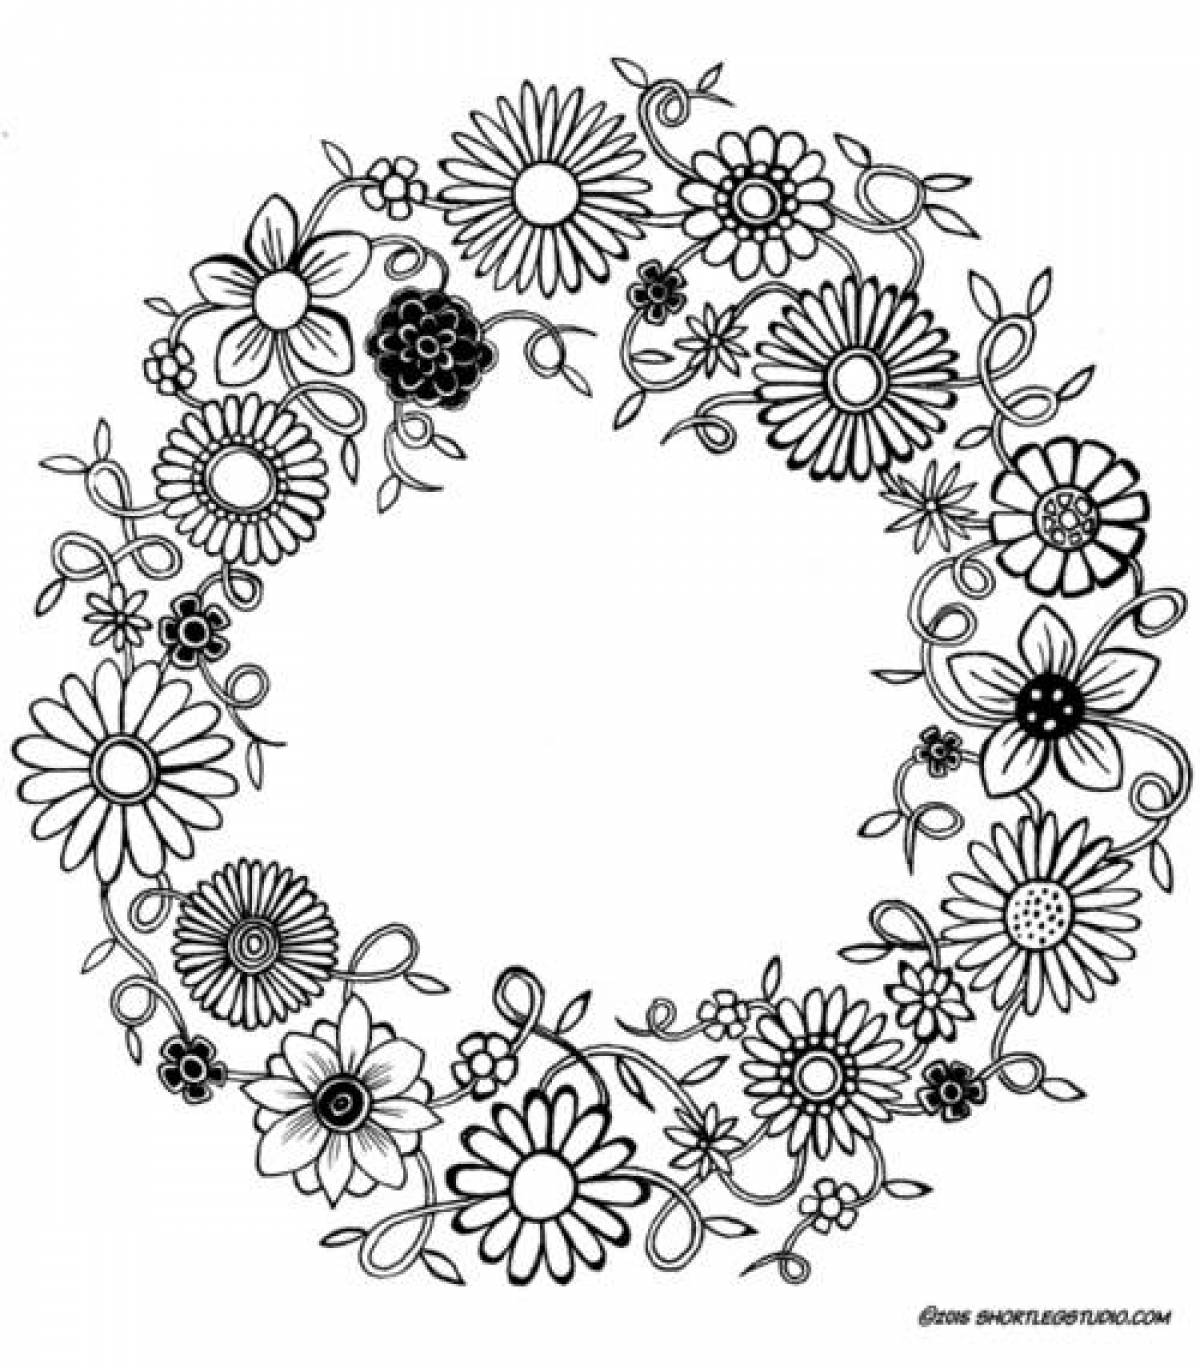 Fancy wreath coloring page